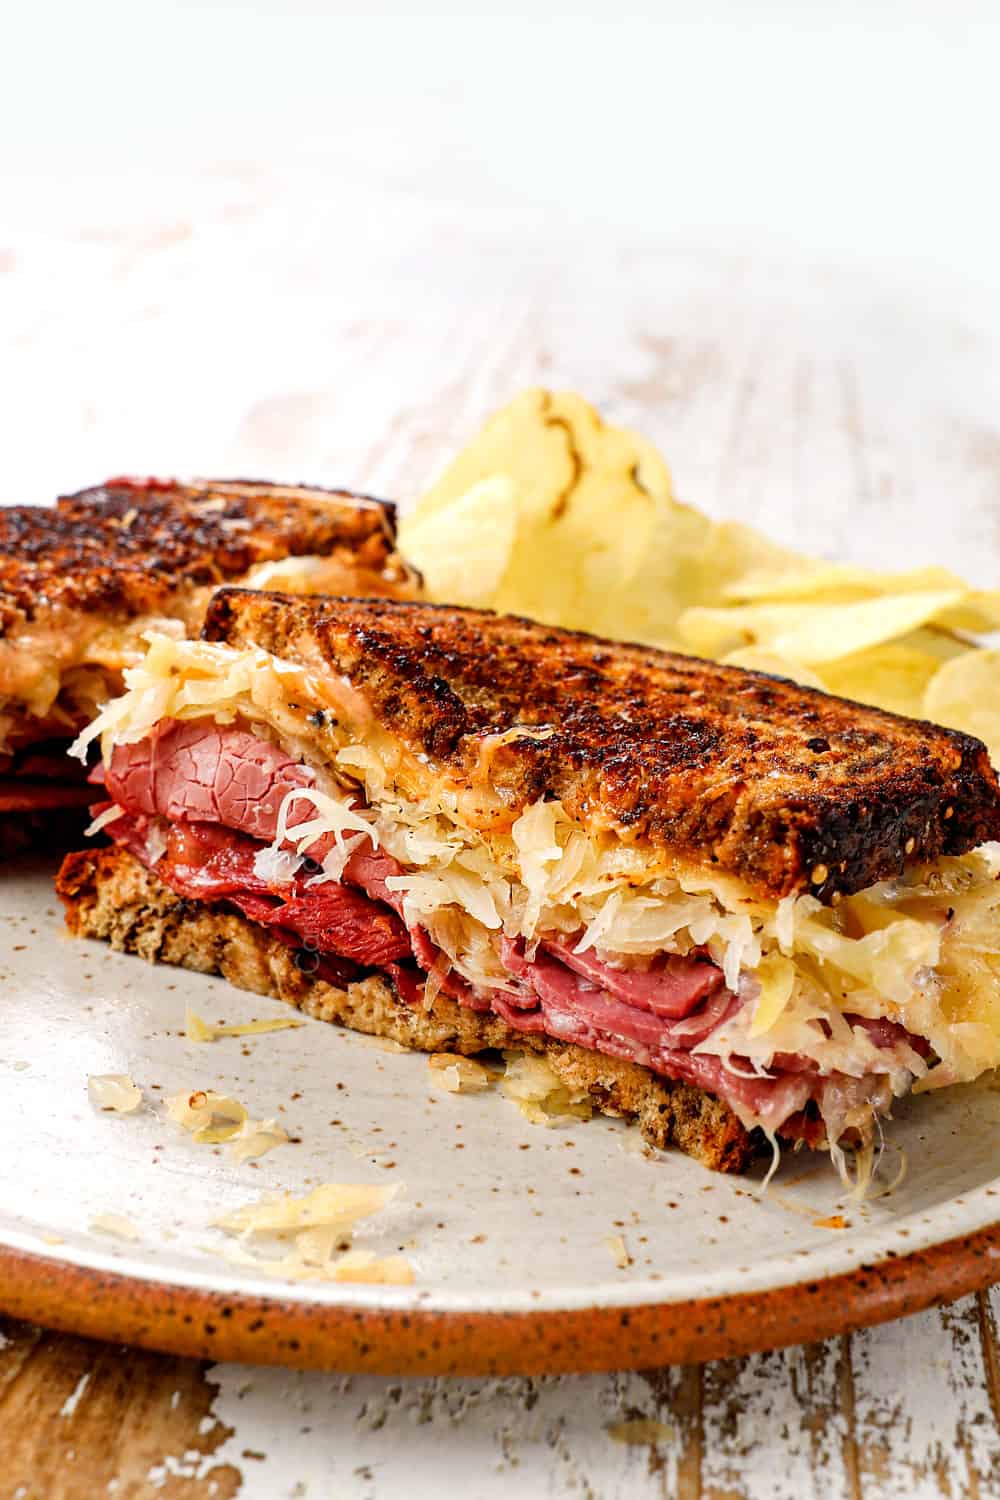 showing how to serve Rueben sandwiches with a Reuben sliced in half on a plate with potato chips